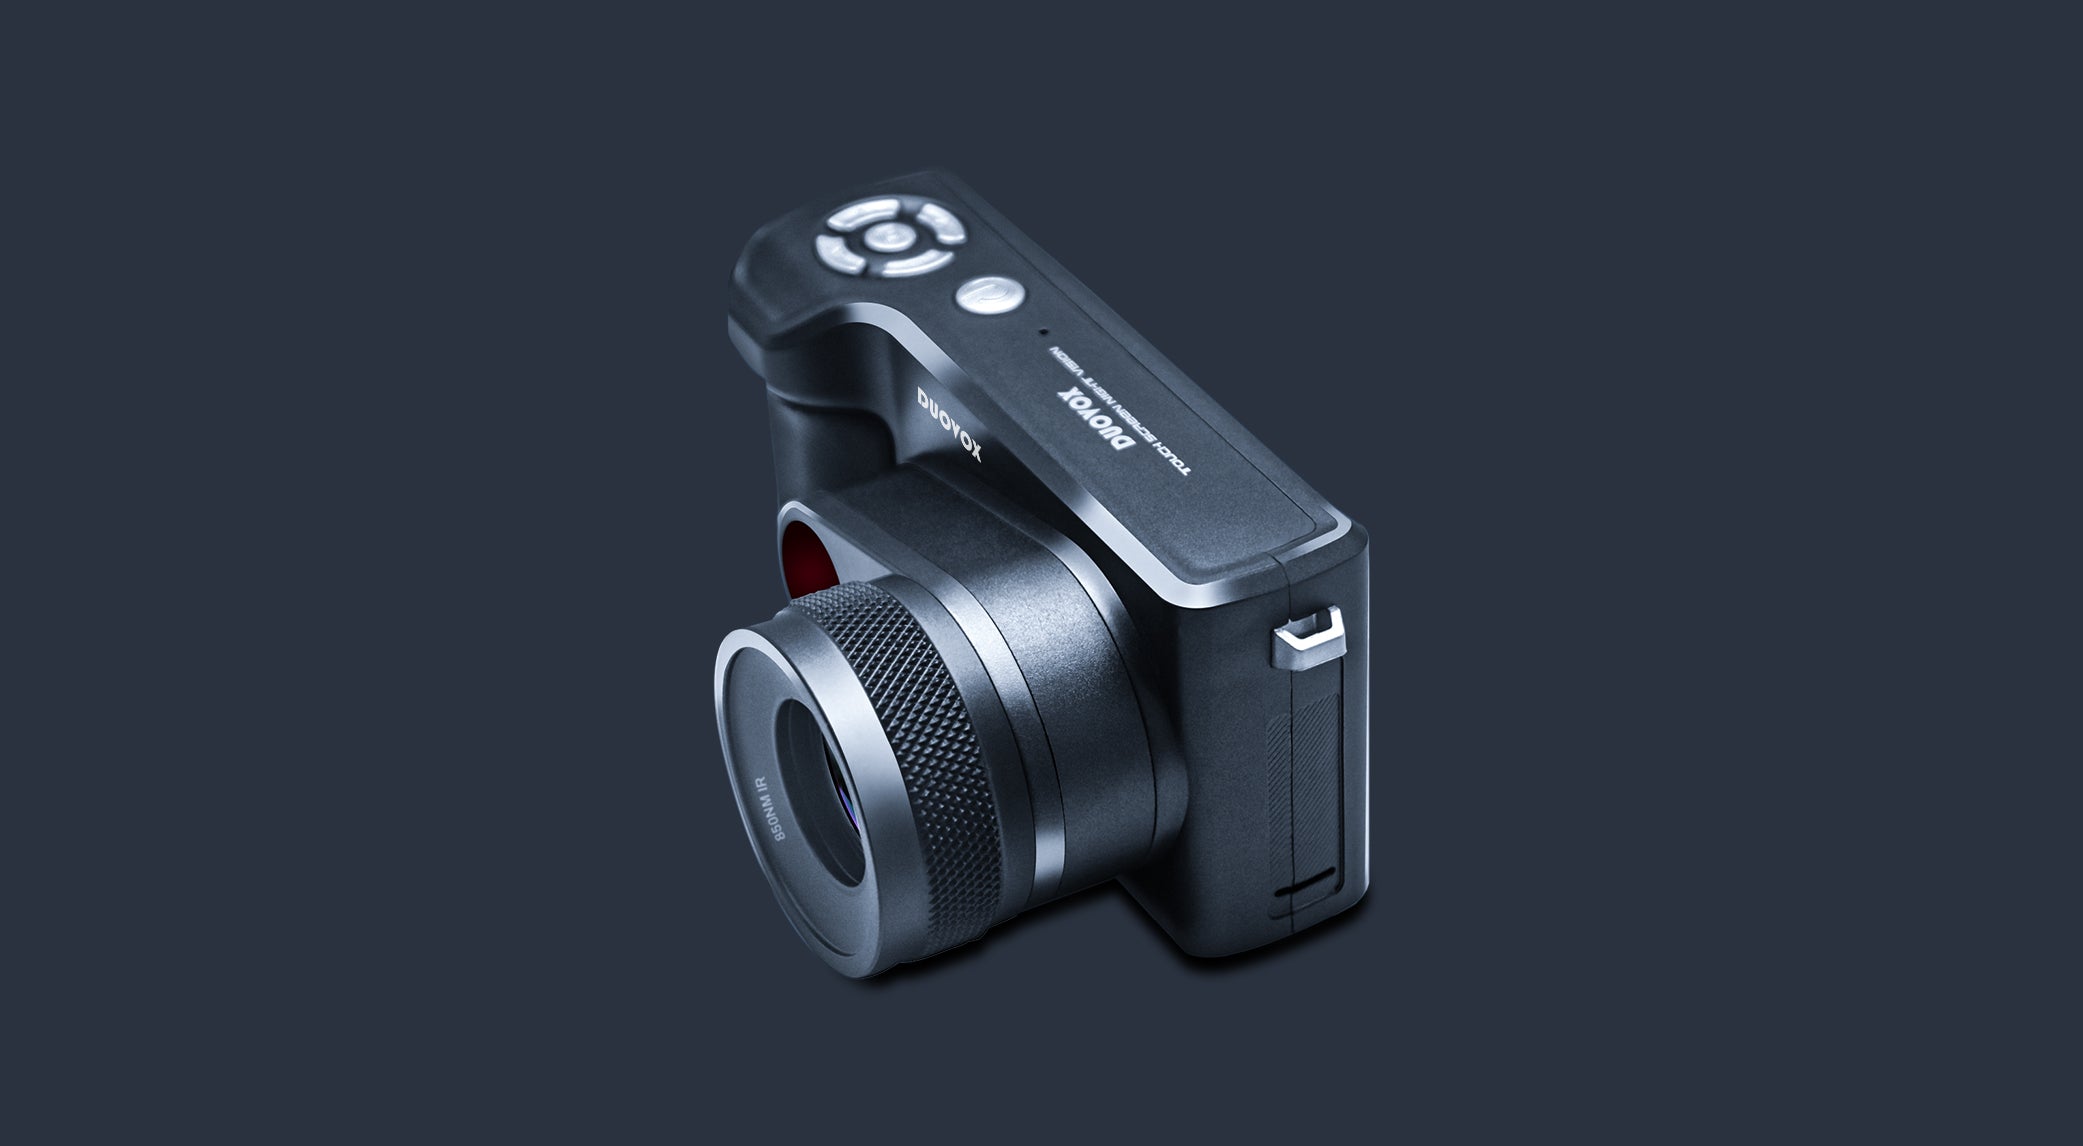 Duovox Mate Pro-The Most Powerful Night Vision